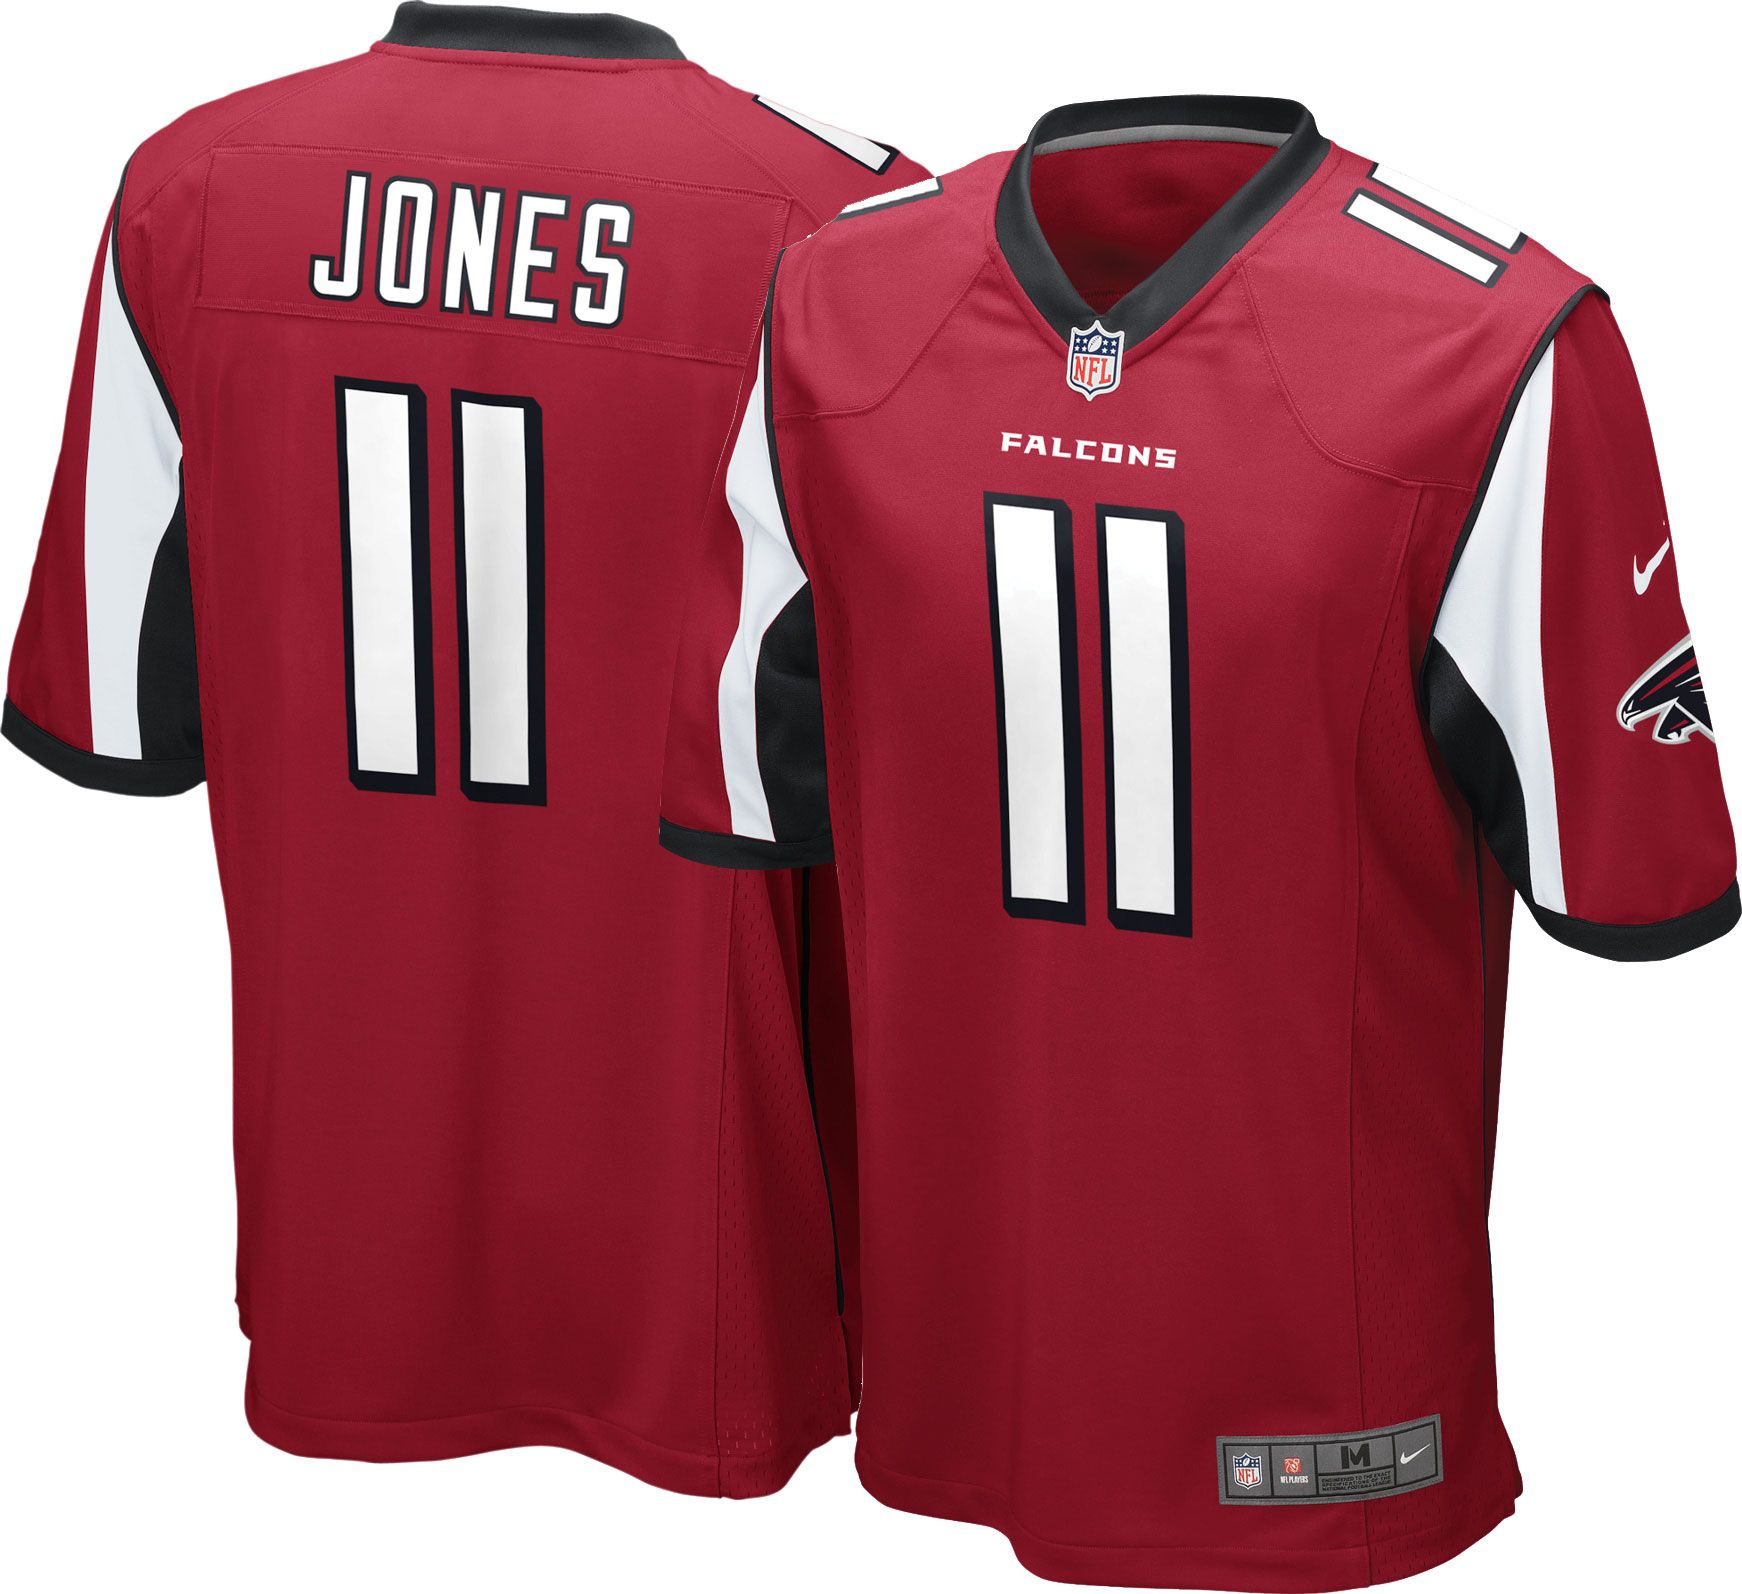 female falcons jersey